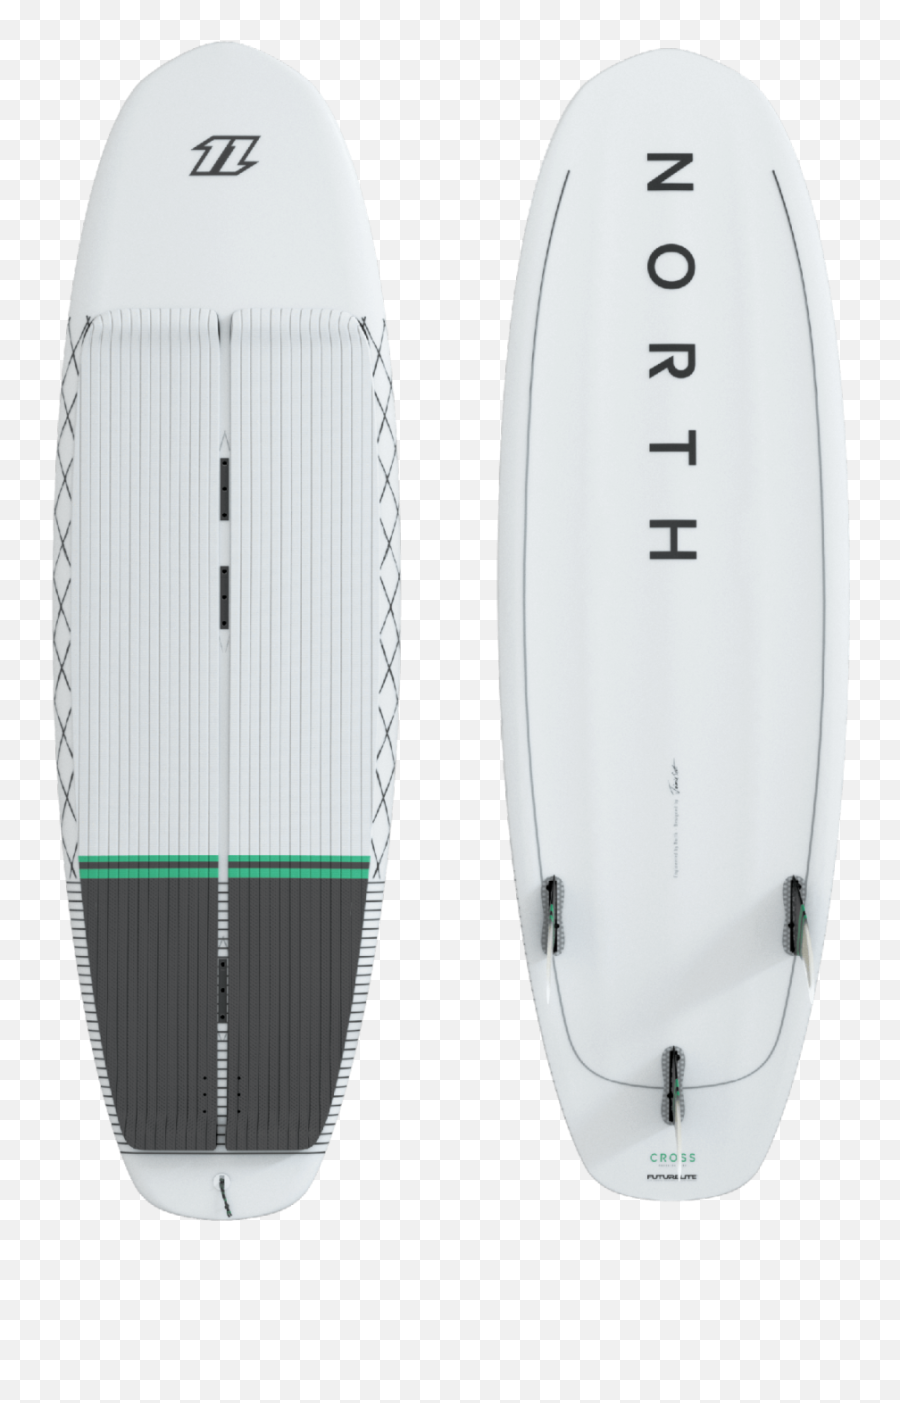 North Kiteboarding 2021 Surfboard Collection Products - North Cross 2021 Png,Surf Board Png